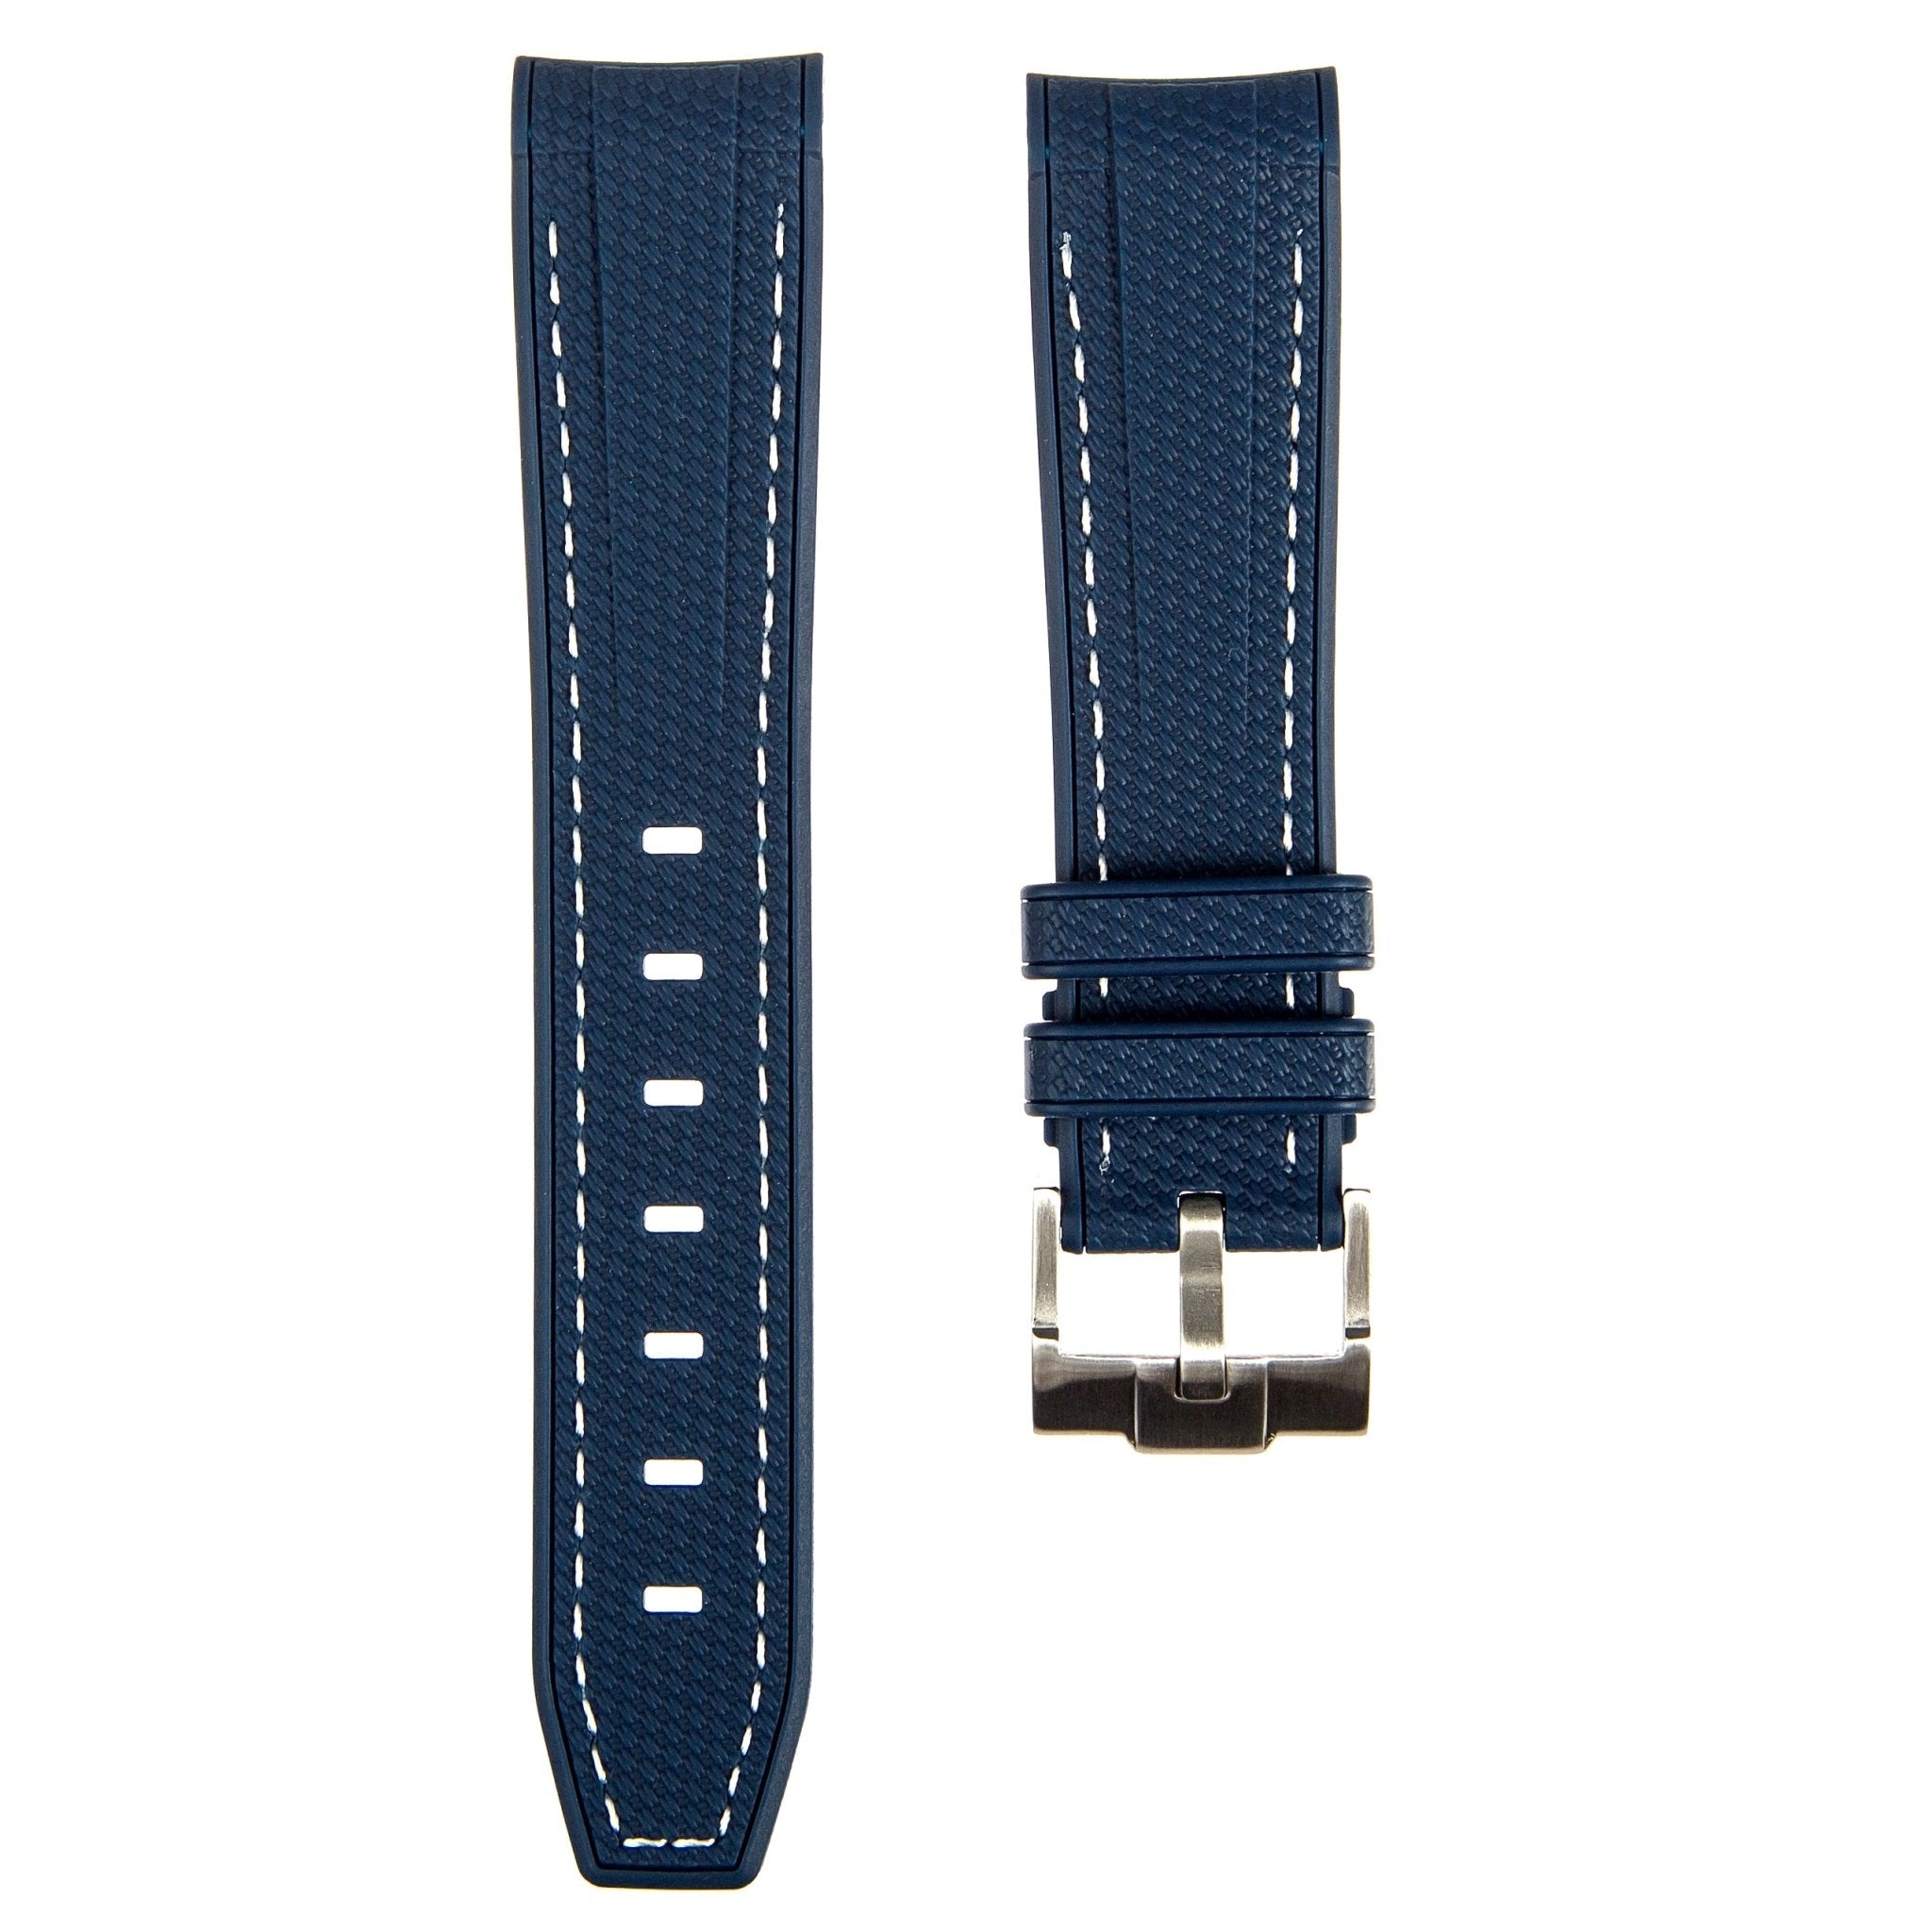 Textured Curved End Premium Silicone Strap – Compatible with Rolex Submariner – Navy with White Stitch (2405) -StrapSeeker